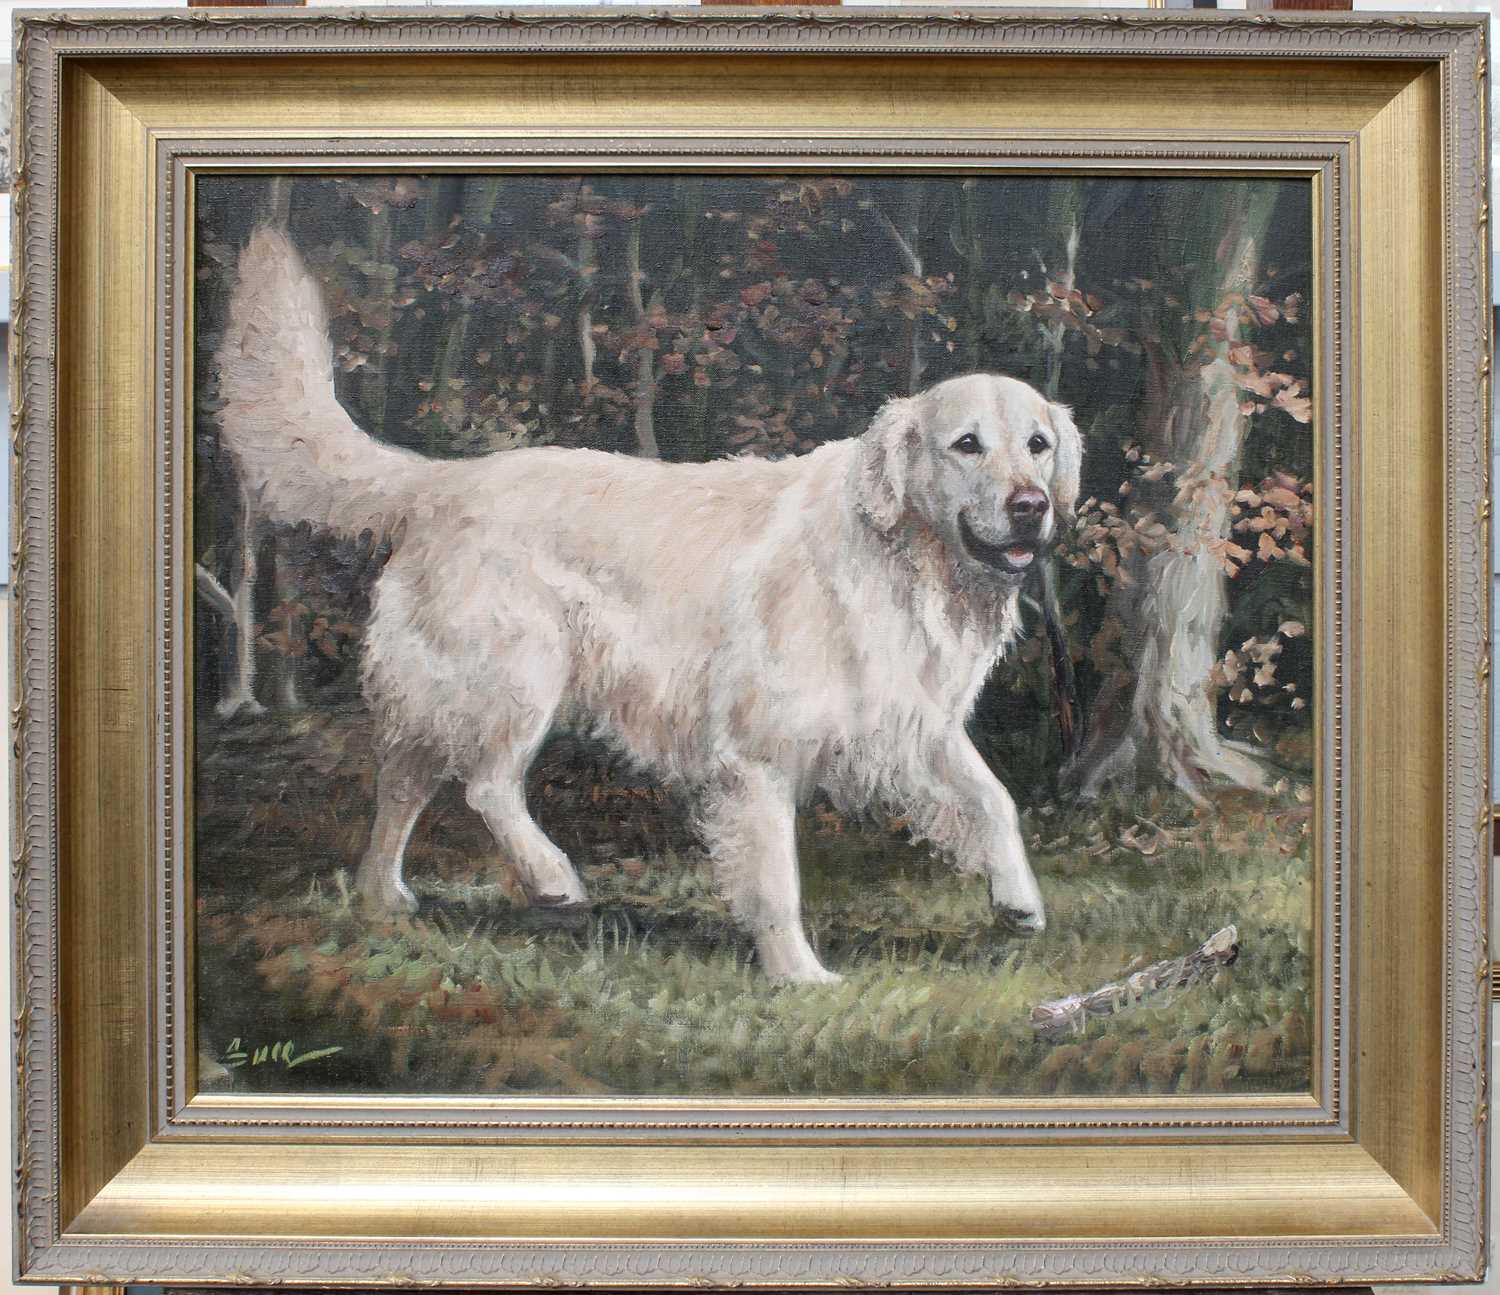 Des Snee (20th Century) "Brig" Portrait of a Golden Retriever Signed, signed, inscribed and dated - Image 2 of 2